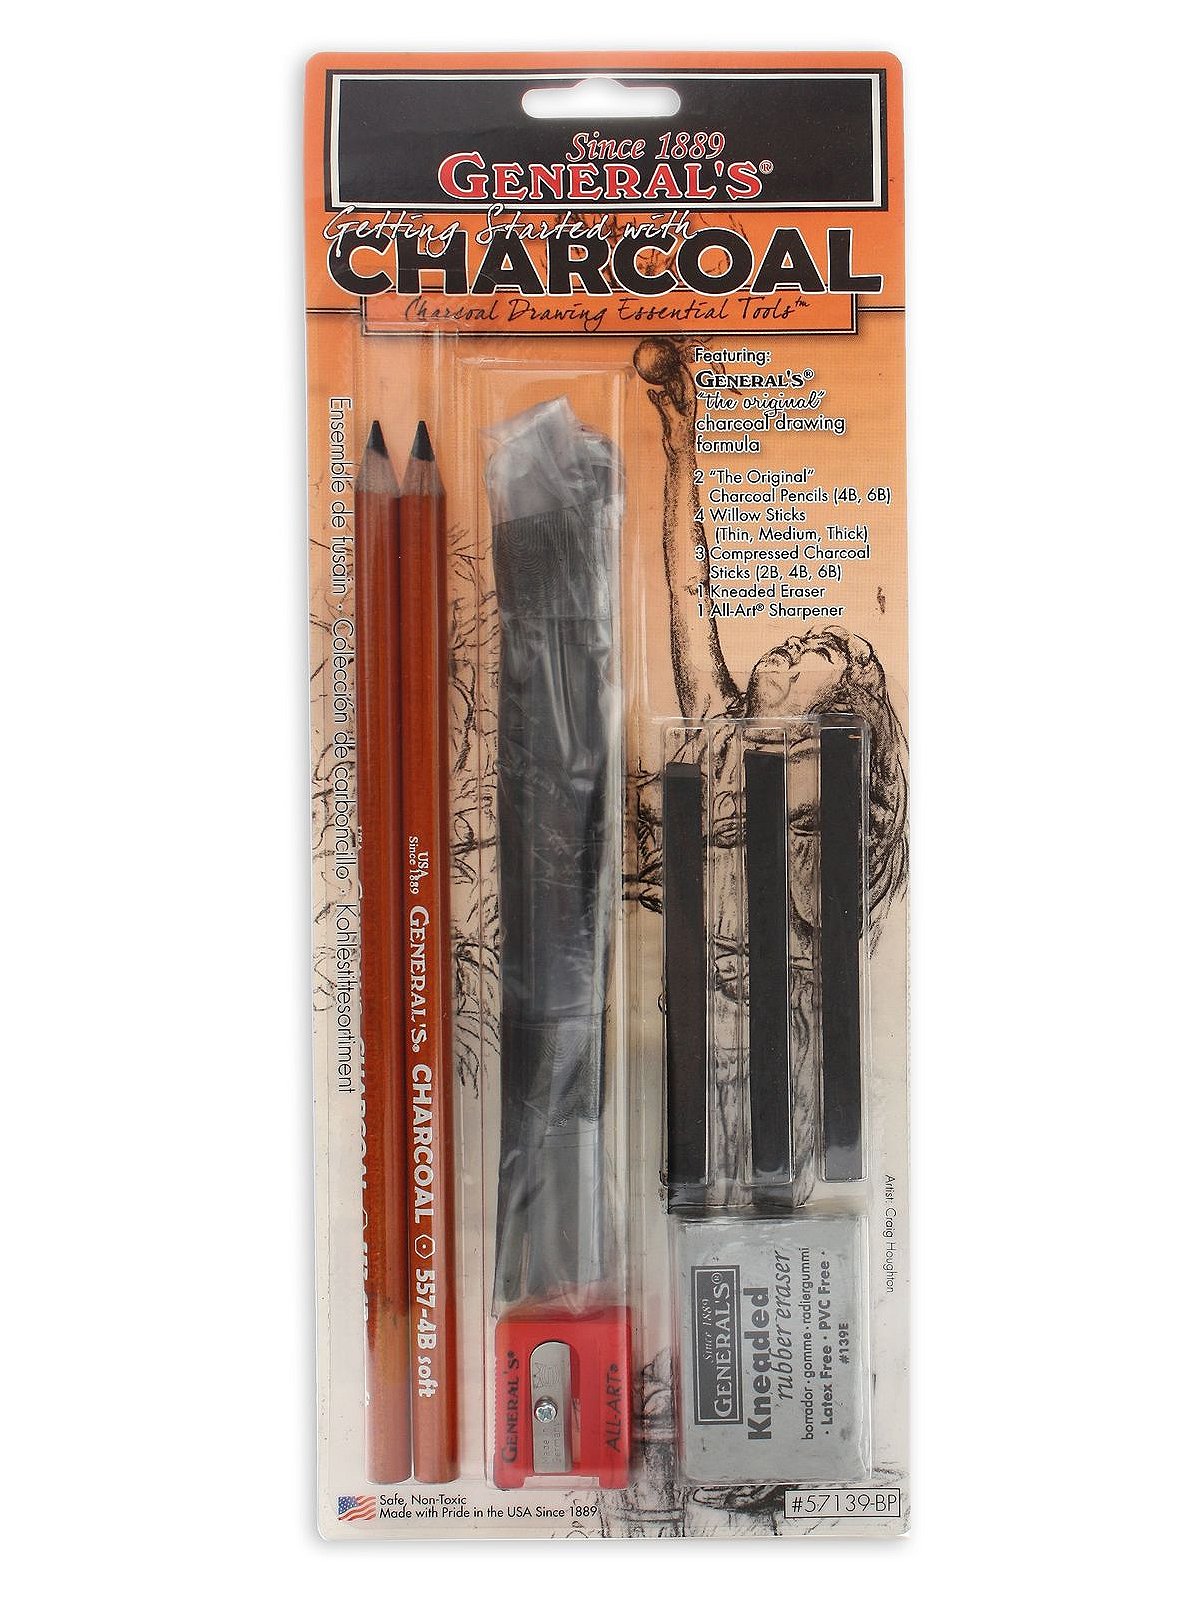 Introduction to Charcoal